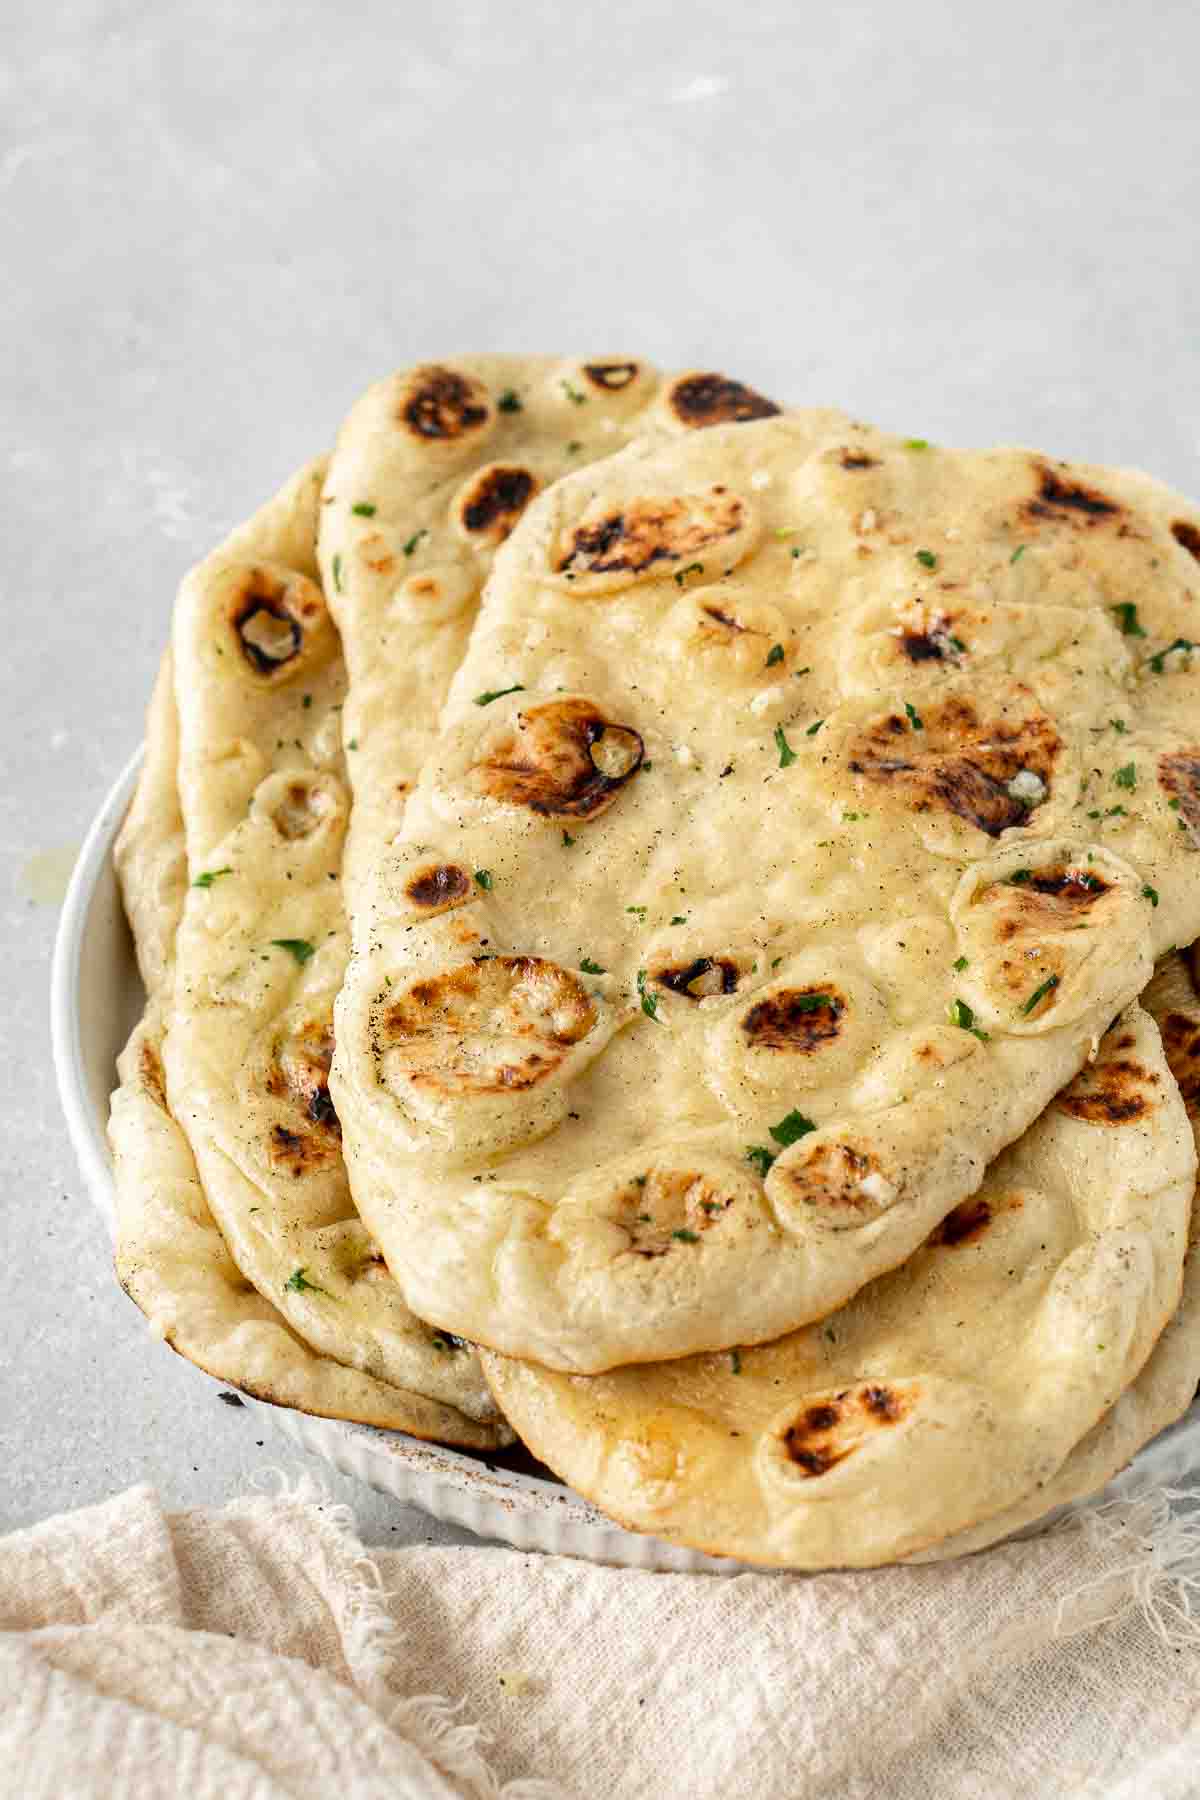 Vegan naans laid out on a plate.